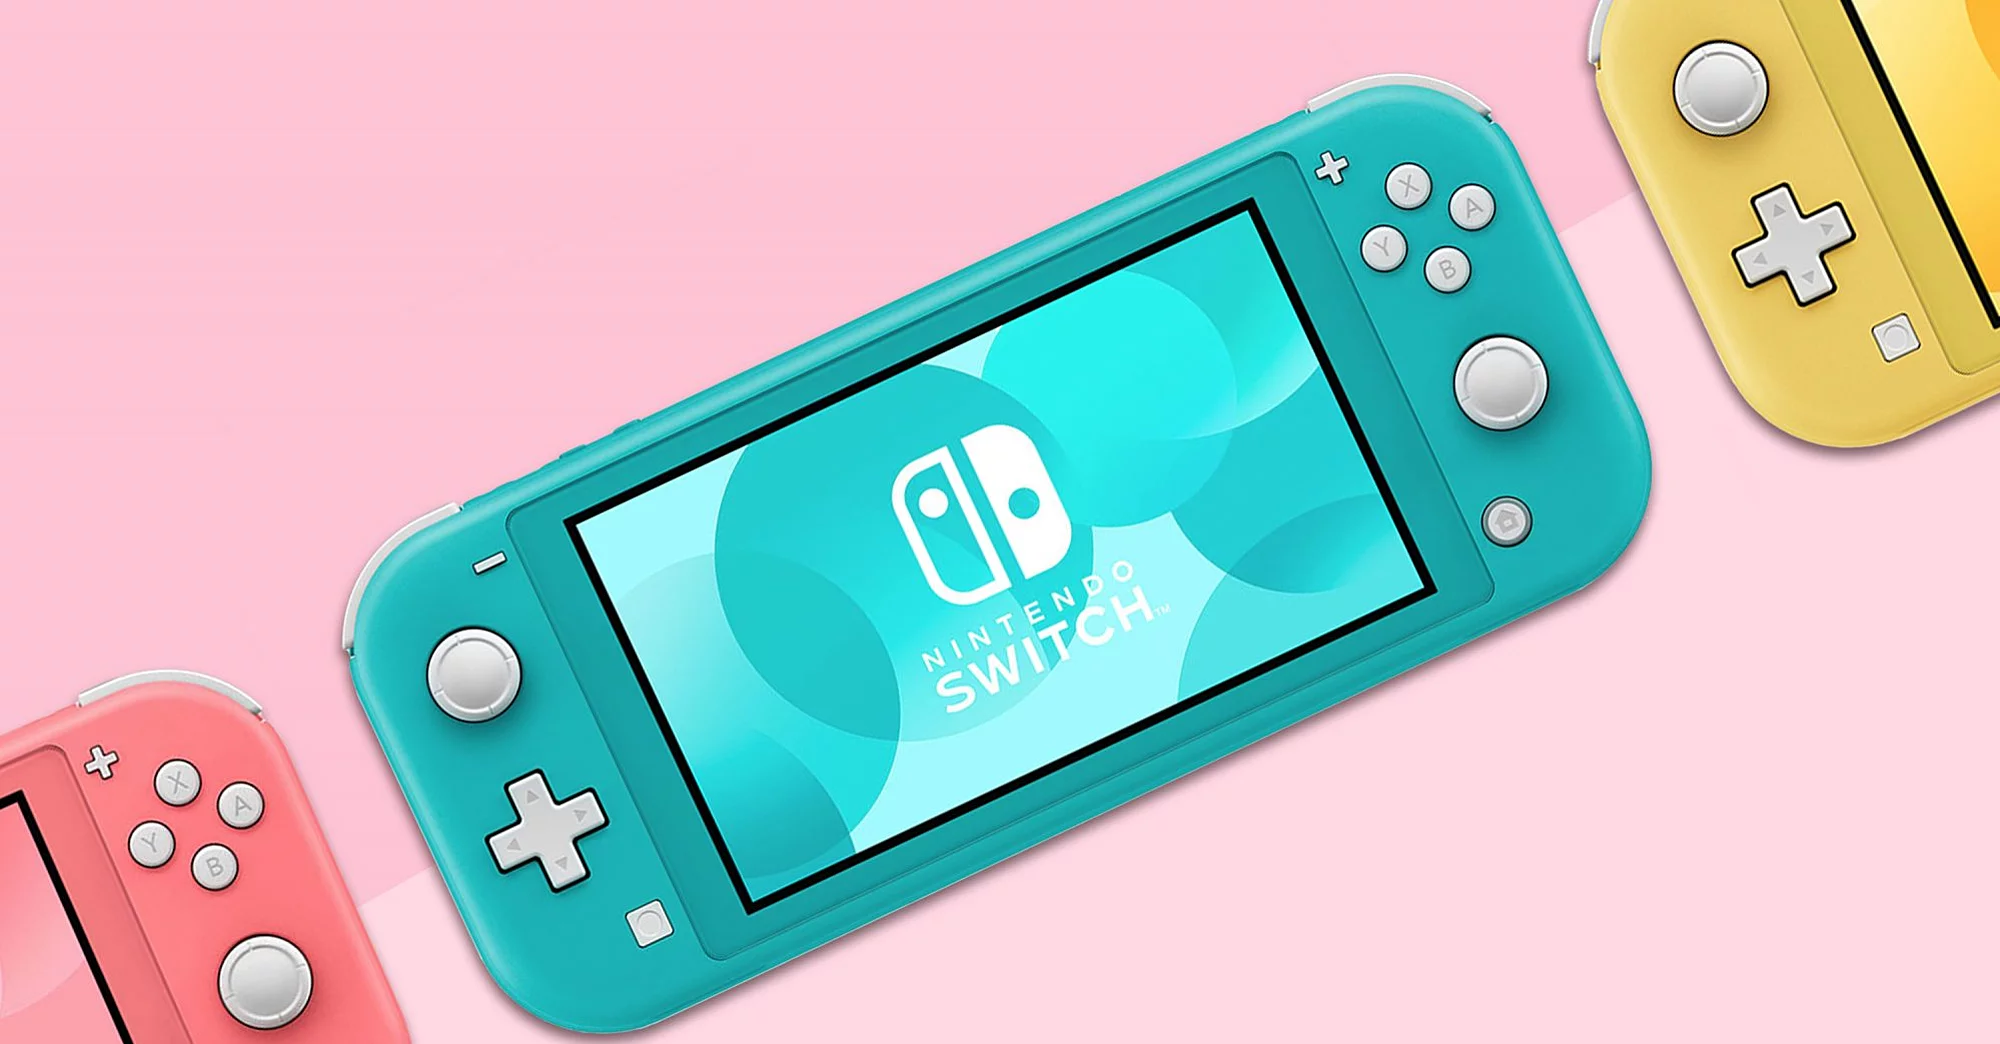 A new, more powerful Switch might arrive in early 2021, claims report